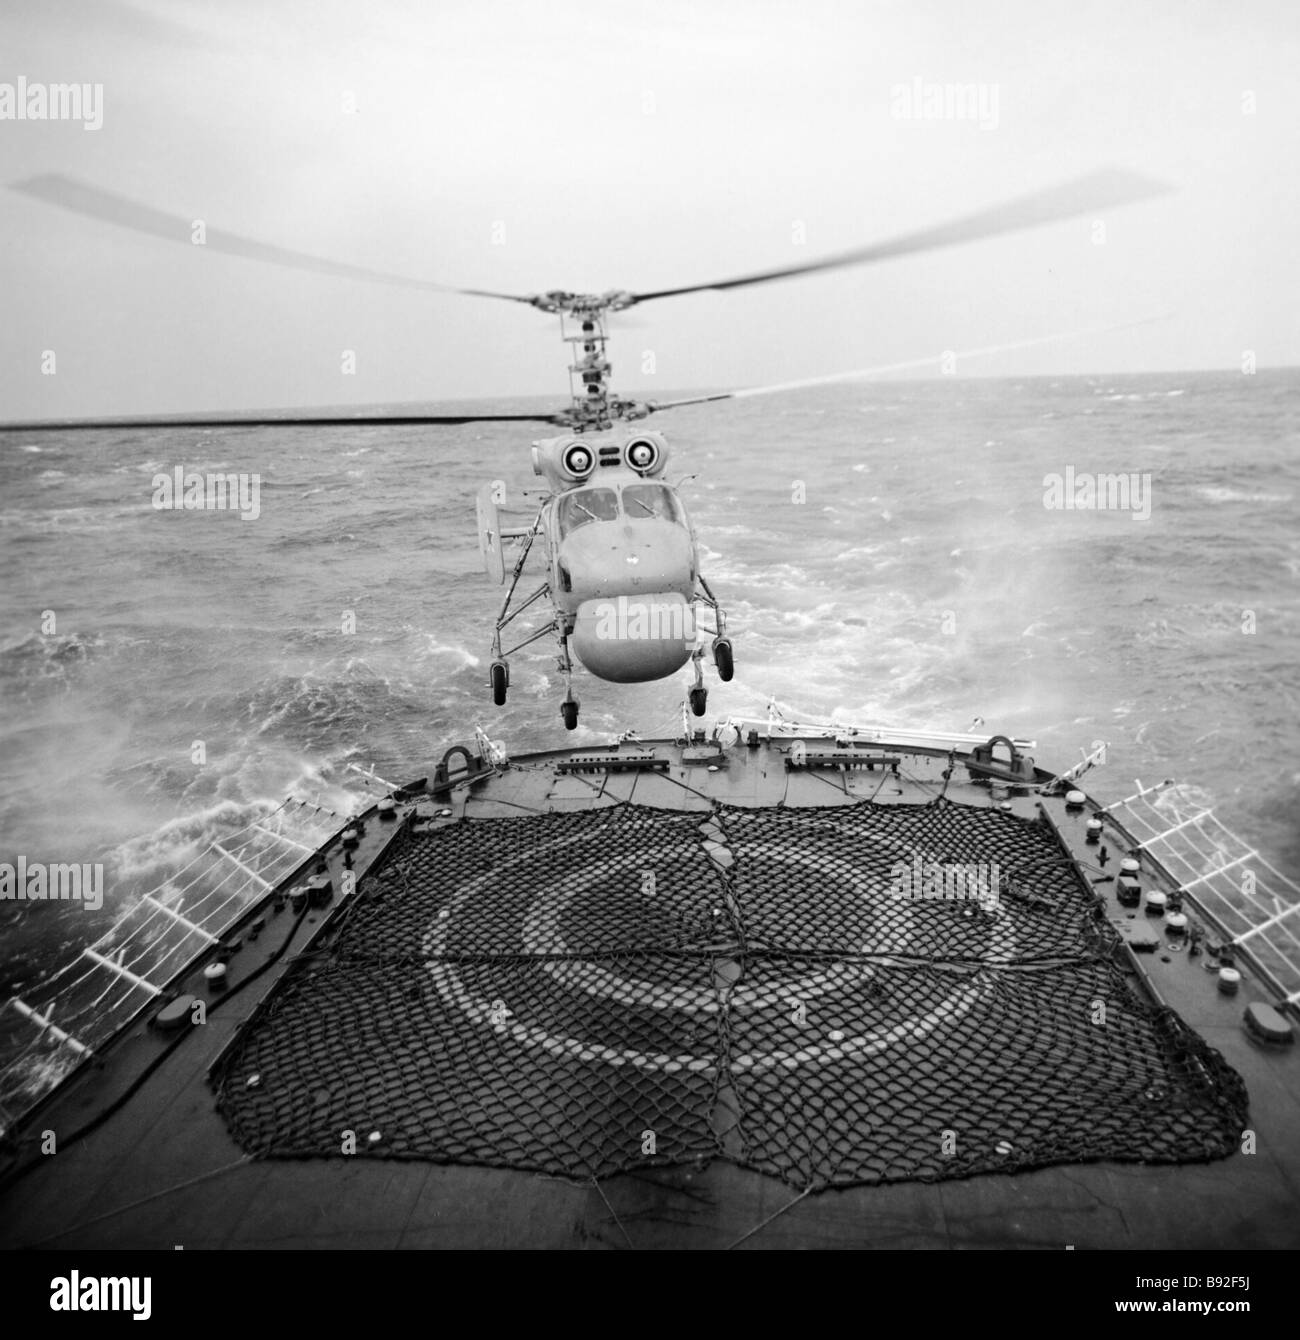 A KA 26 antisubmarine helicopter lands on its carrier deck Stock Photo